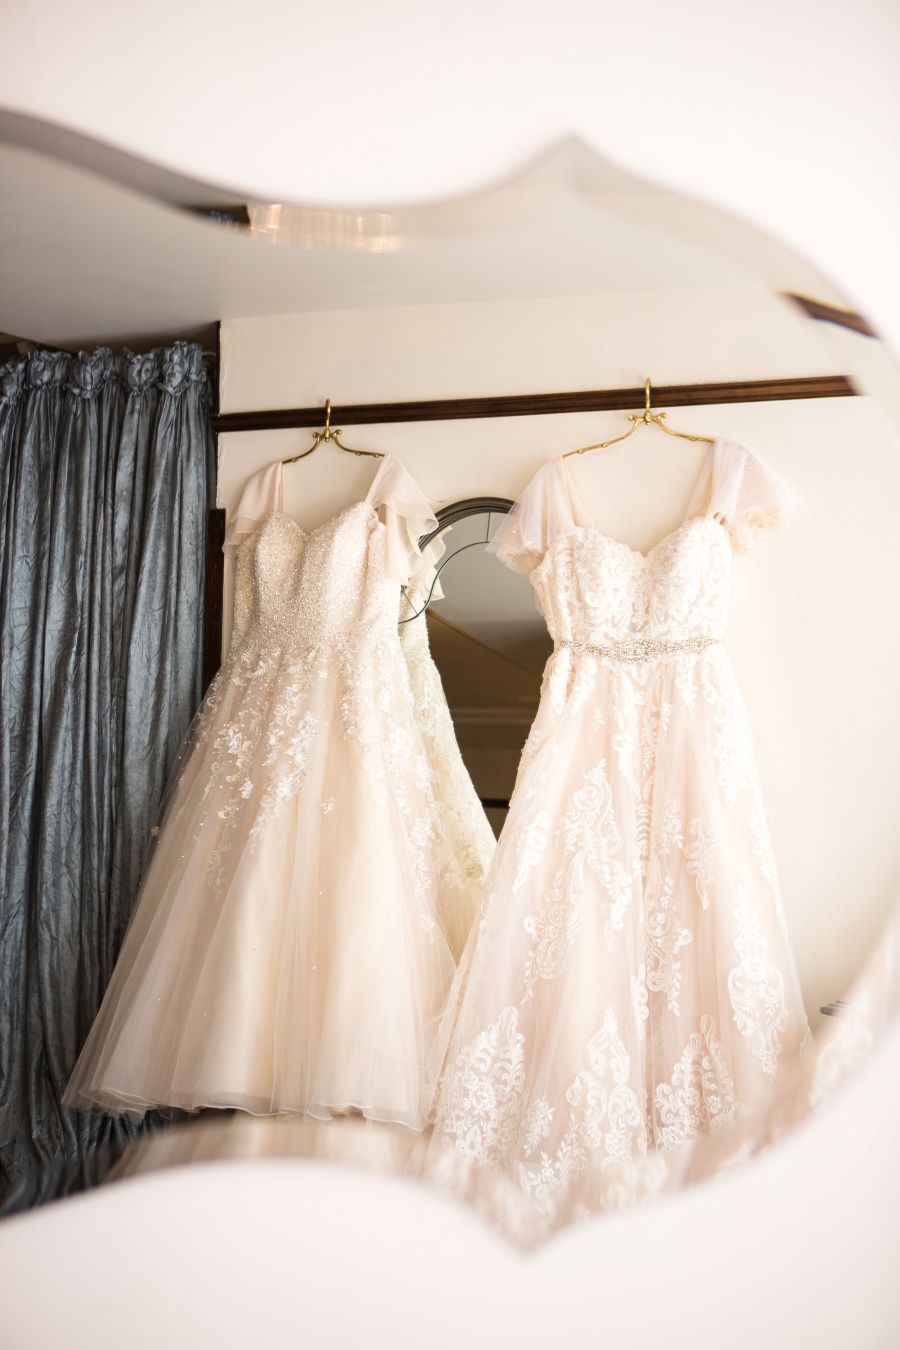 Both lace lgbt bridal gowns hanging in bridal suite of Nashville wedding venue / Romantic / Summer / September / Pink / Dusty Rose / Cream